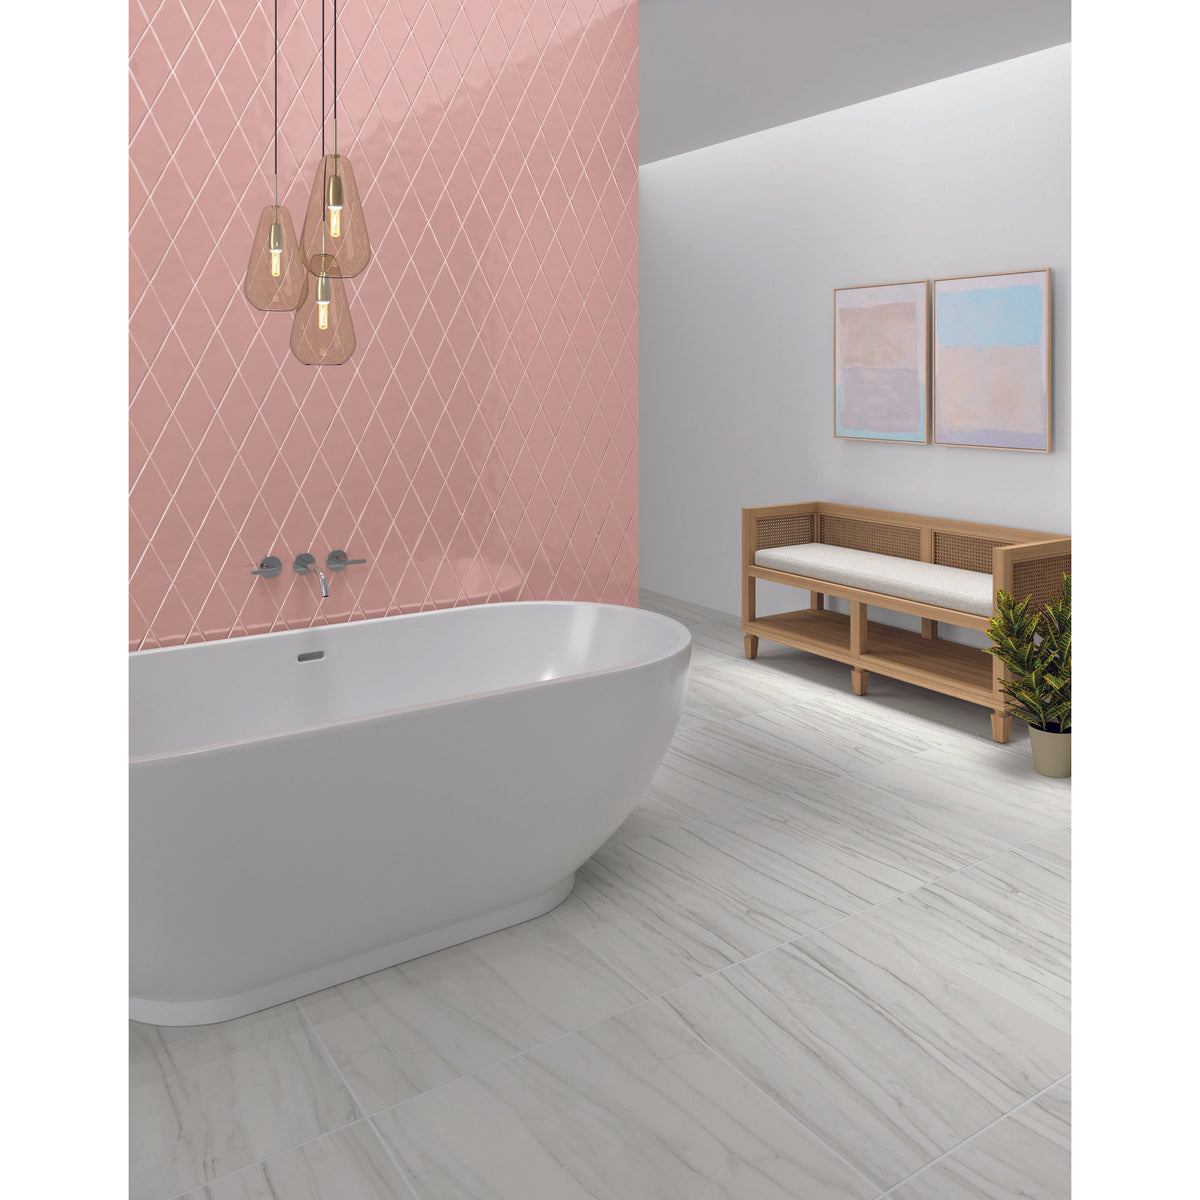 American Olean - Playscapes Harlequin Wall Tile - Peony PS75 Installed